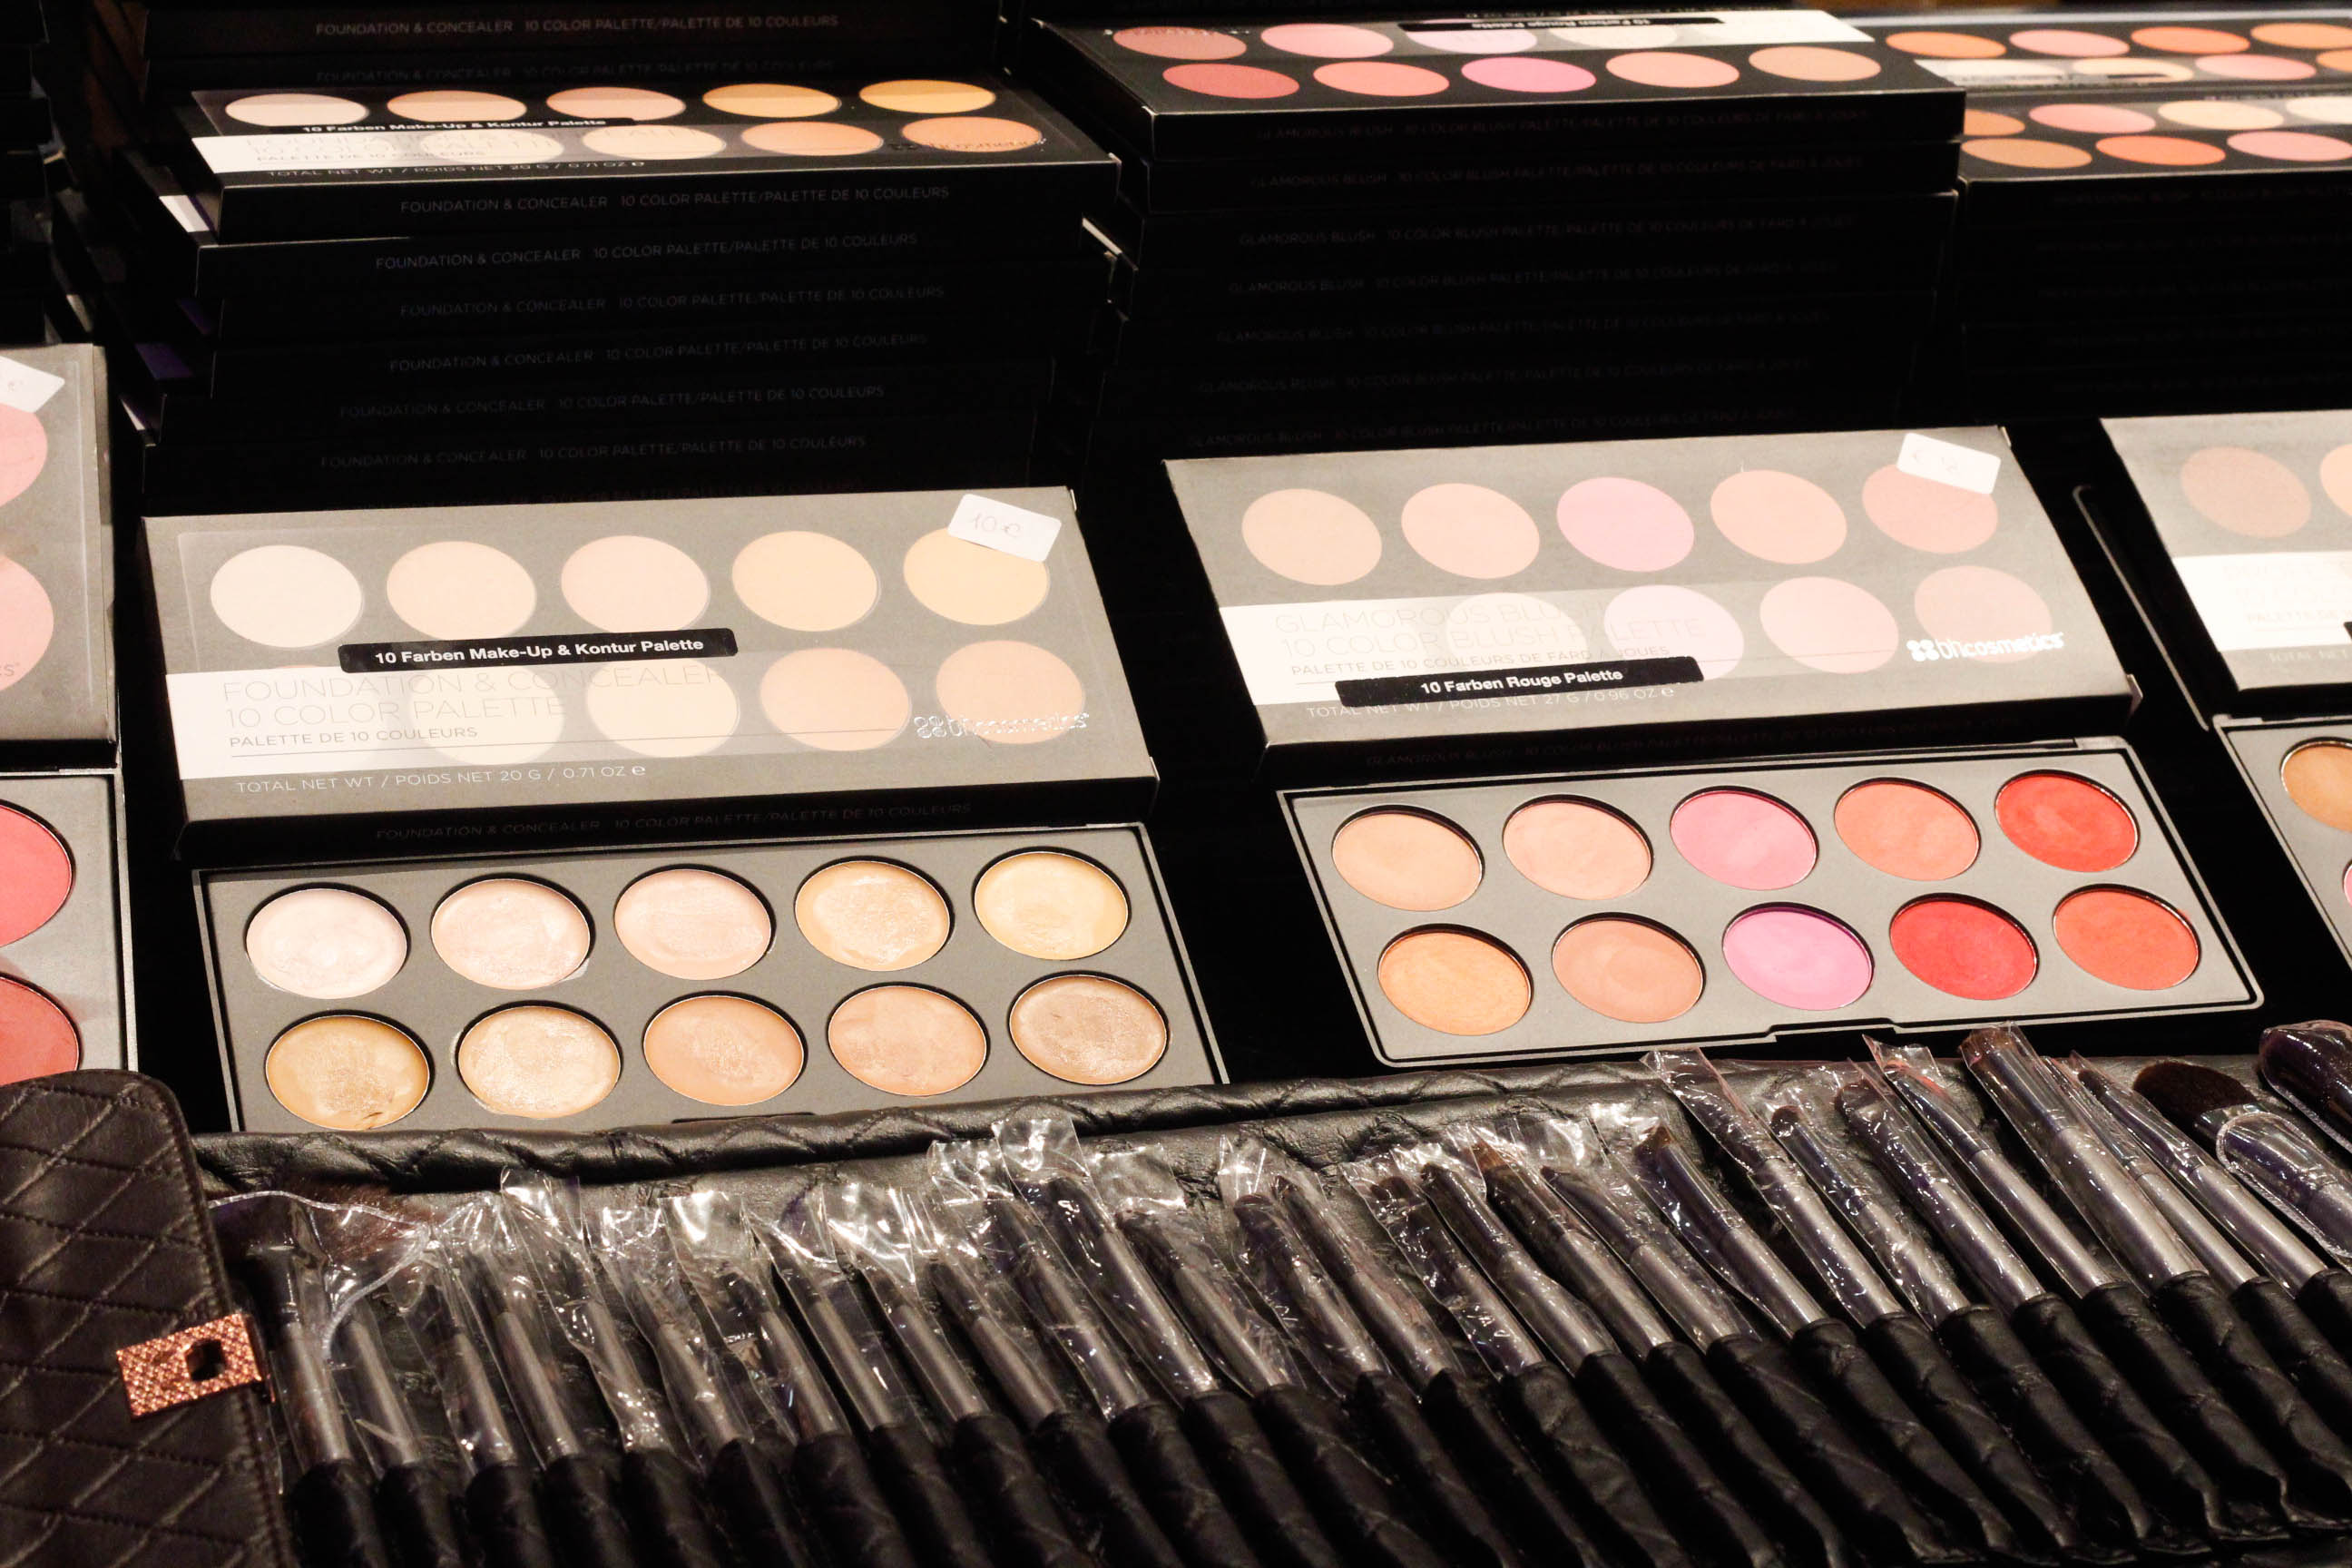 Lancome Messestand Glow Convention Hannover - BH Cosmetics Verkaufsstand